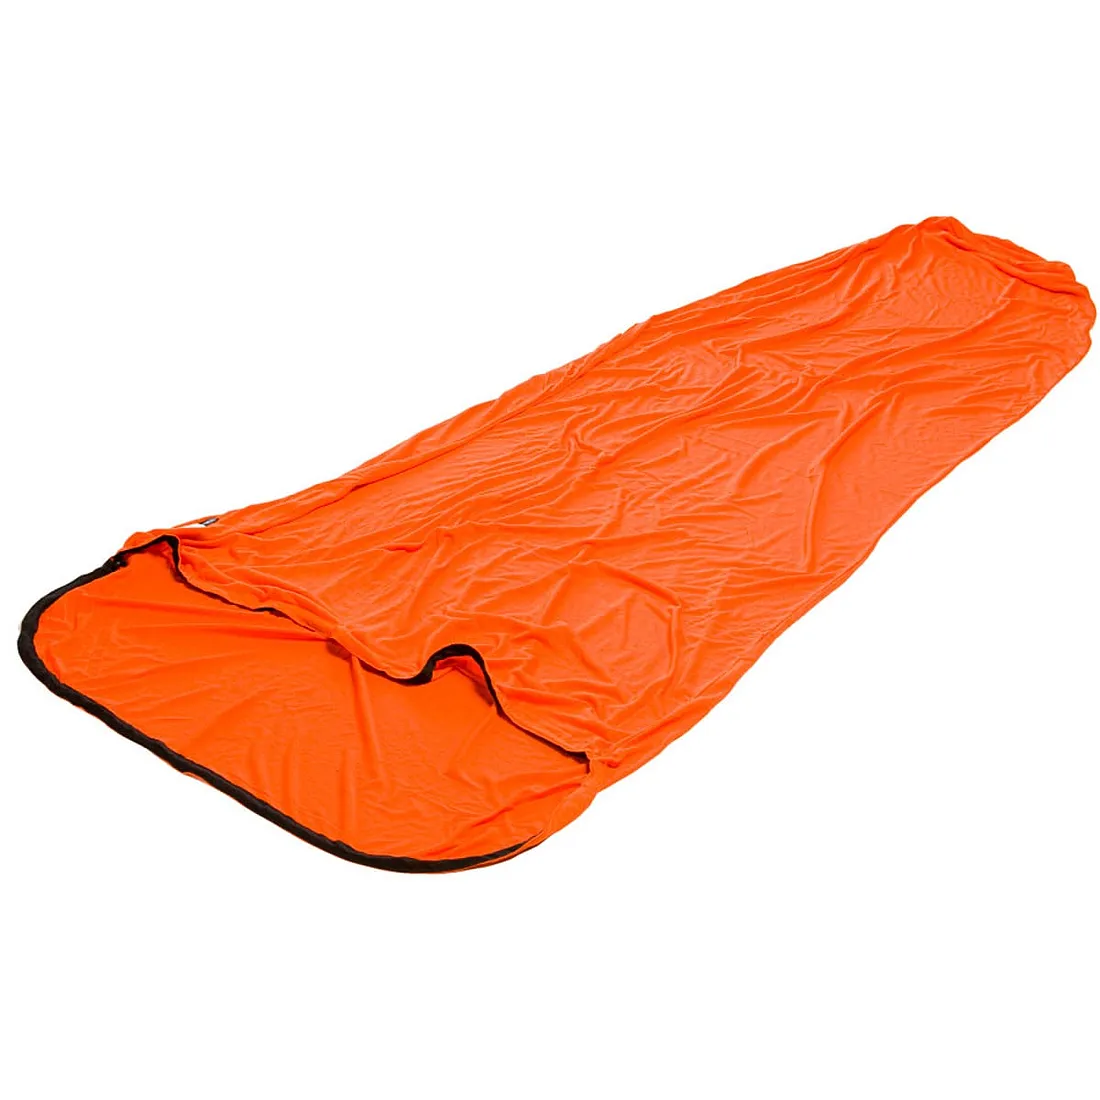 Sea to Summit Reactor Extreme Thermolite Liner Sleeping Bag Liner